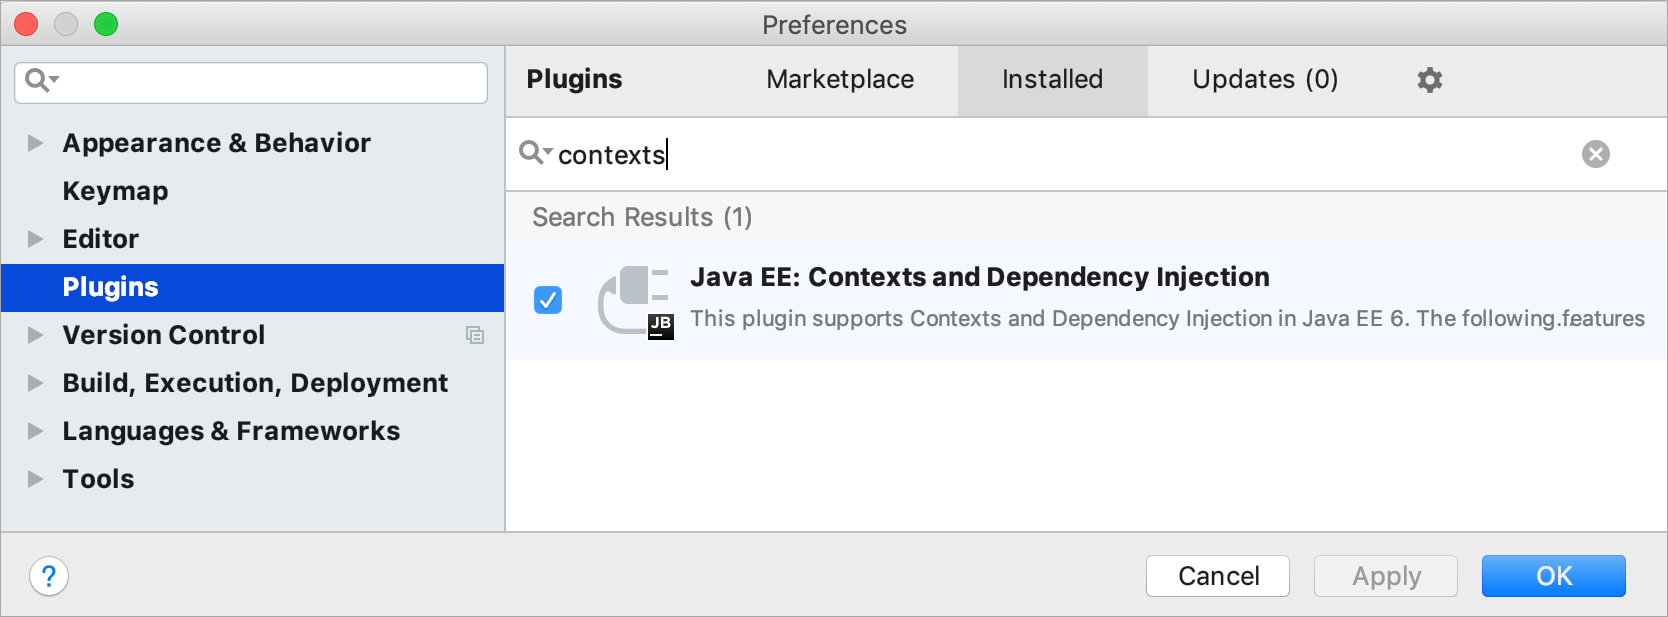 build app file for mac not to reference java 6